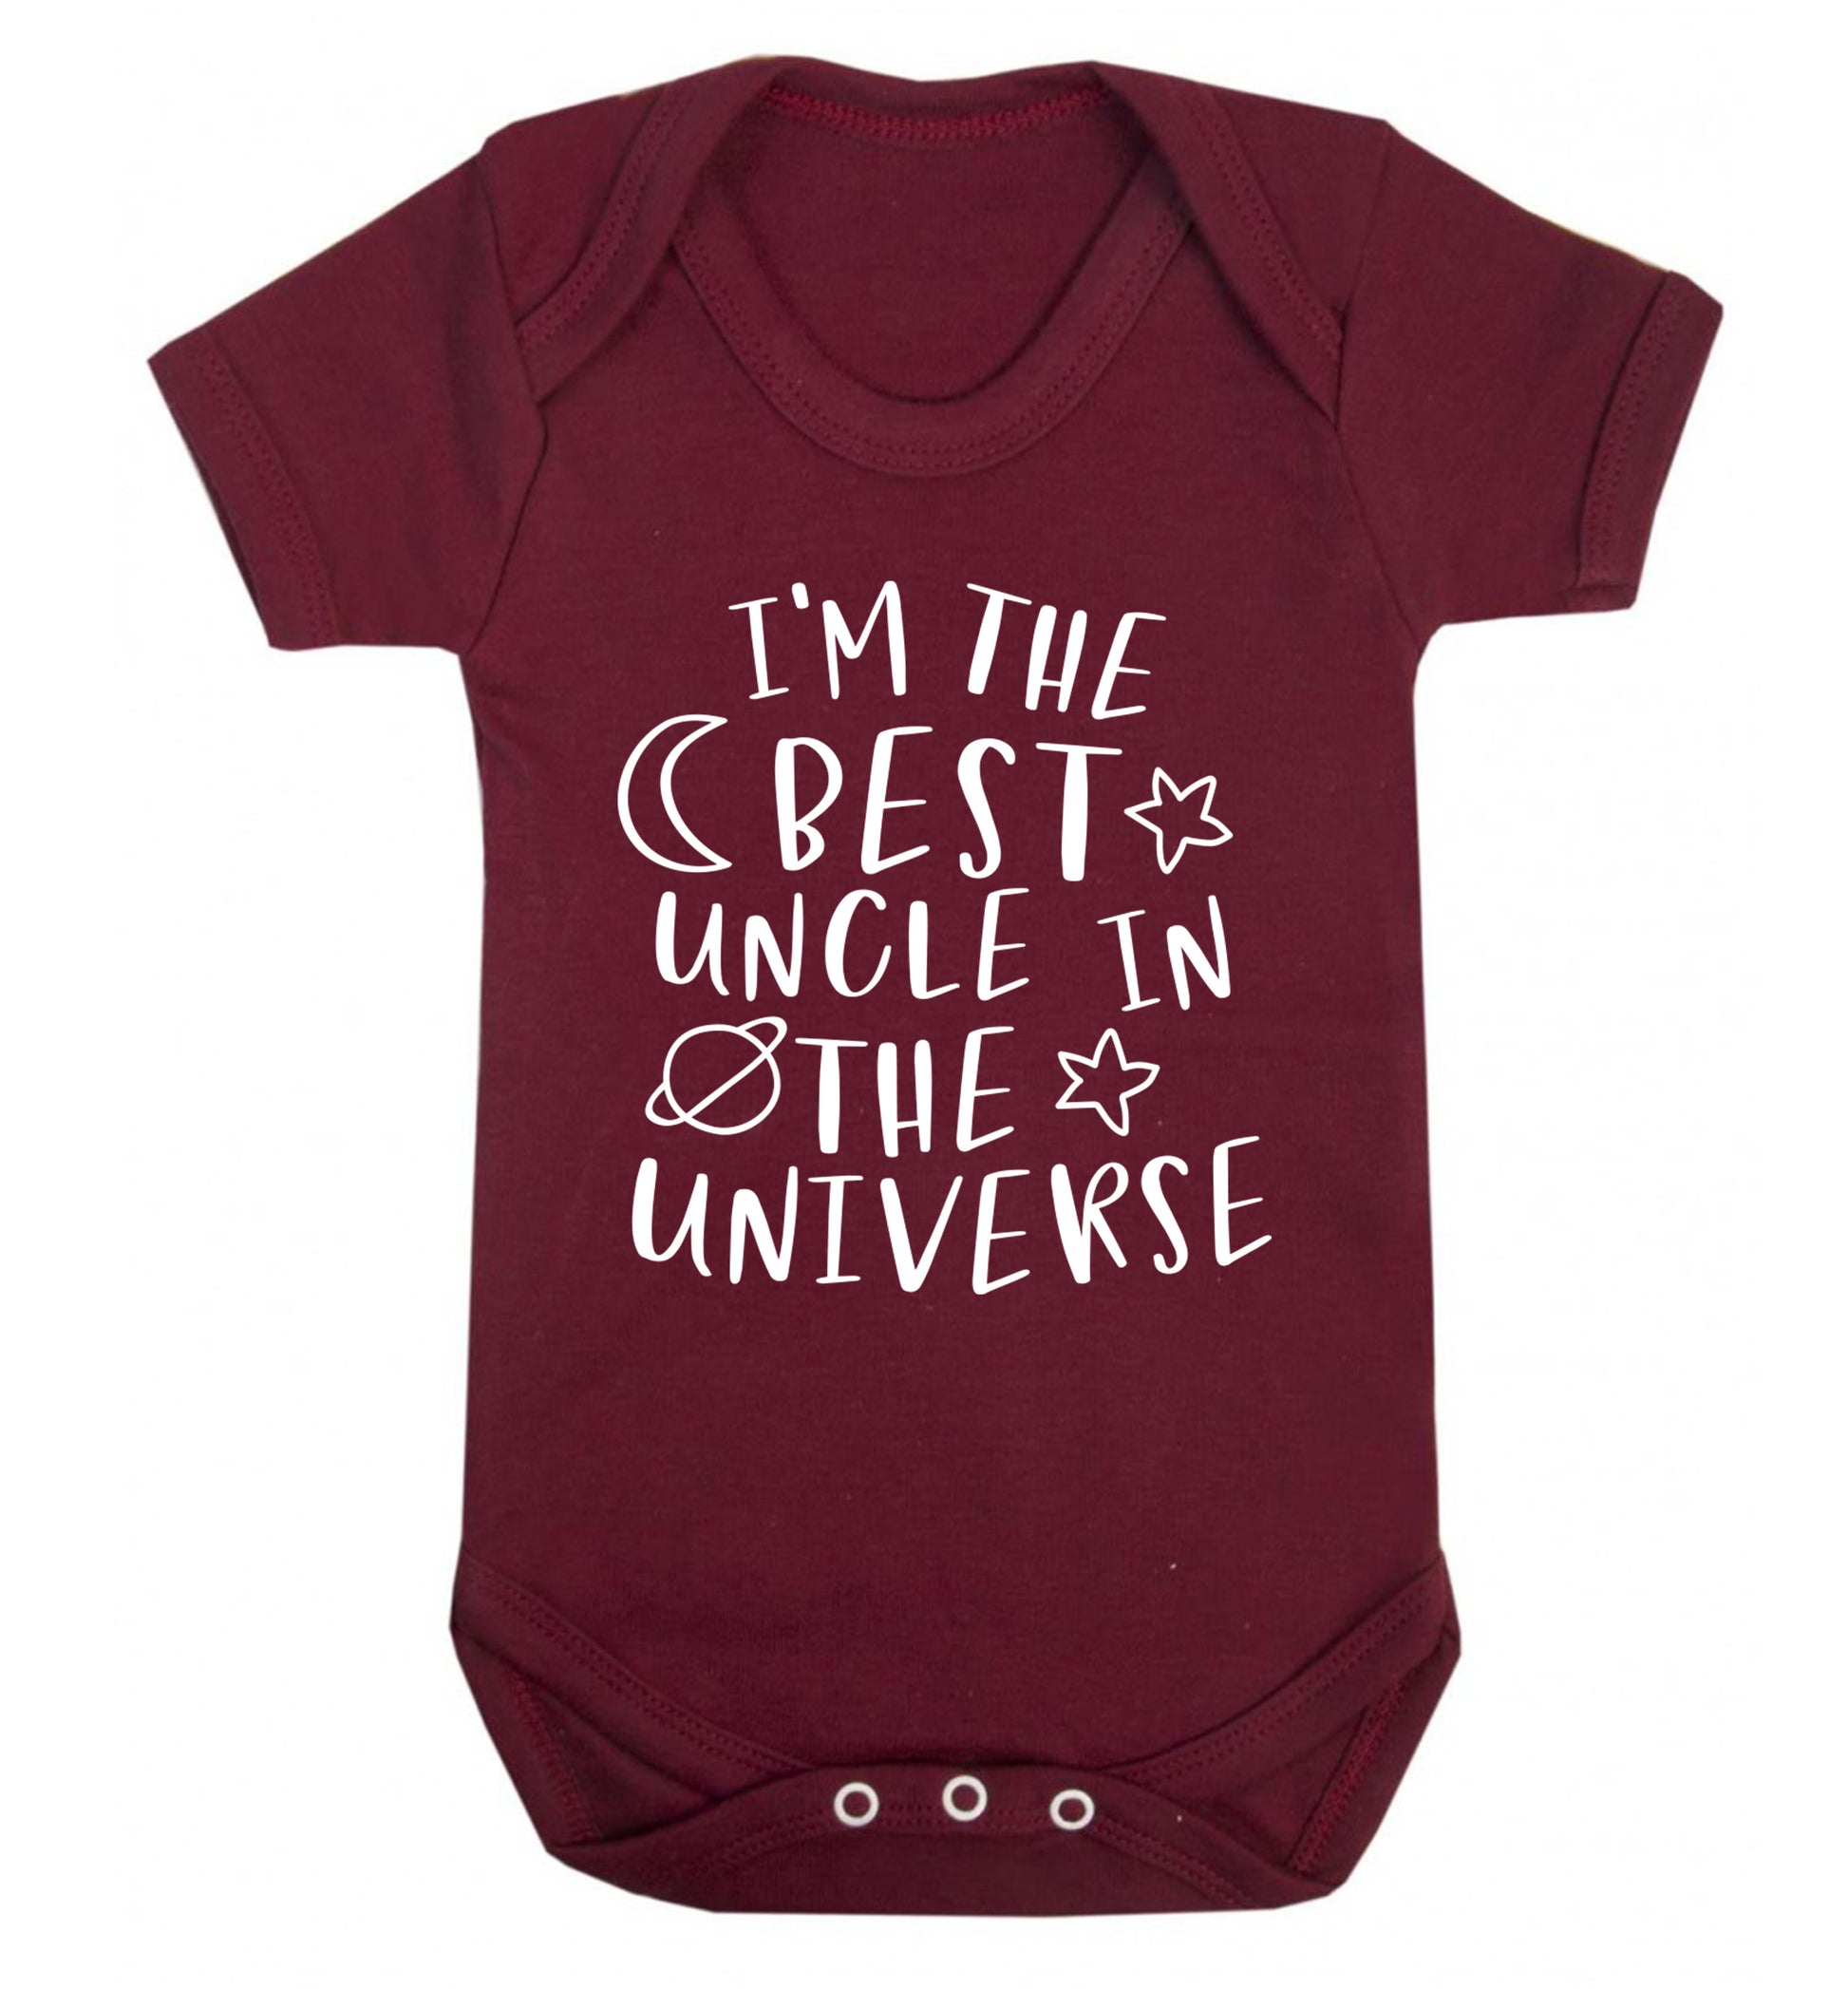 I'm the best uncle in the universe Baby Vest maroon 18-24 months